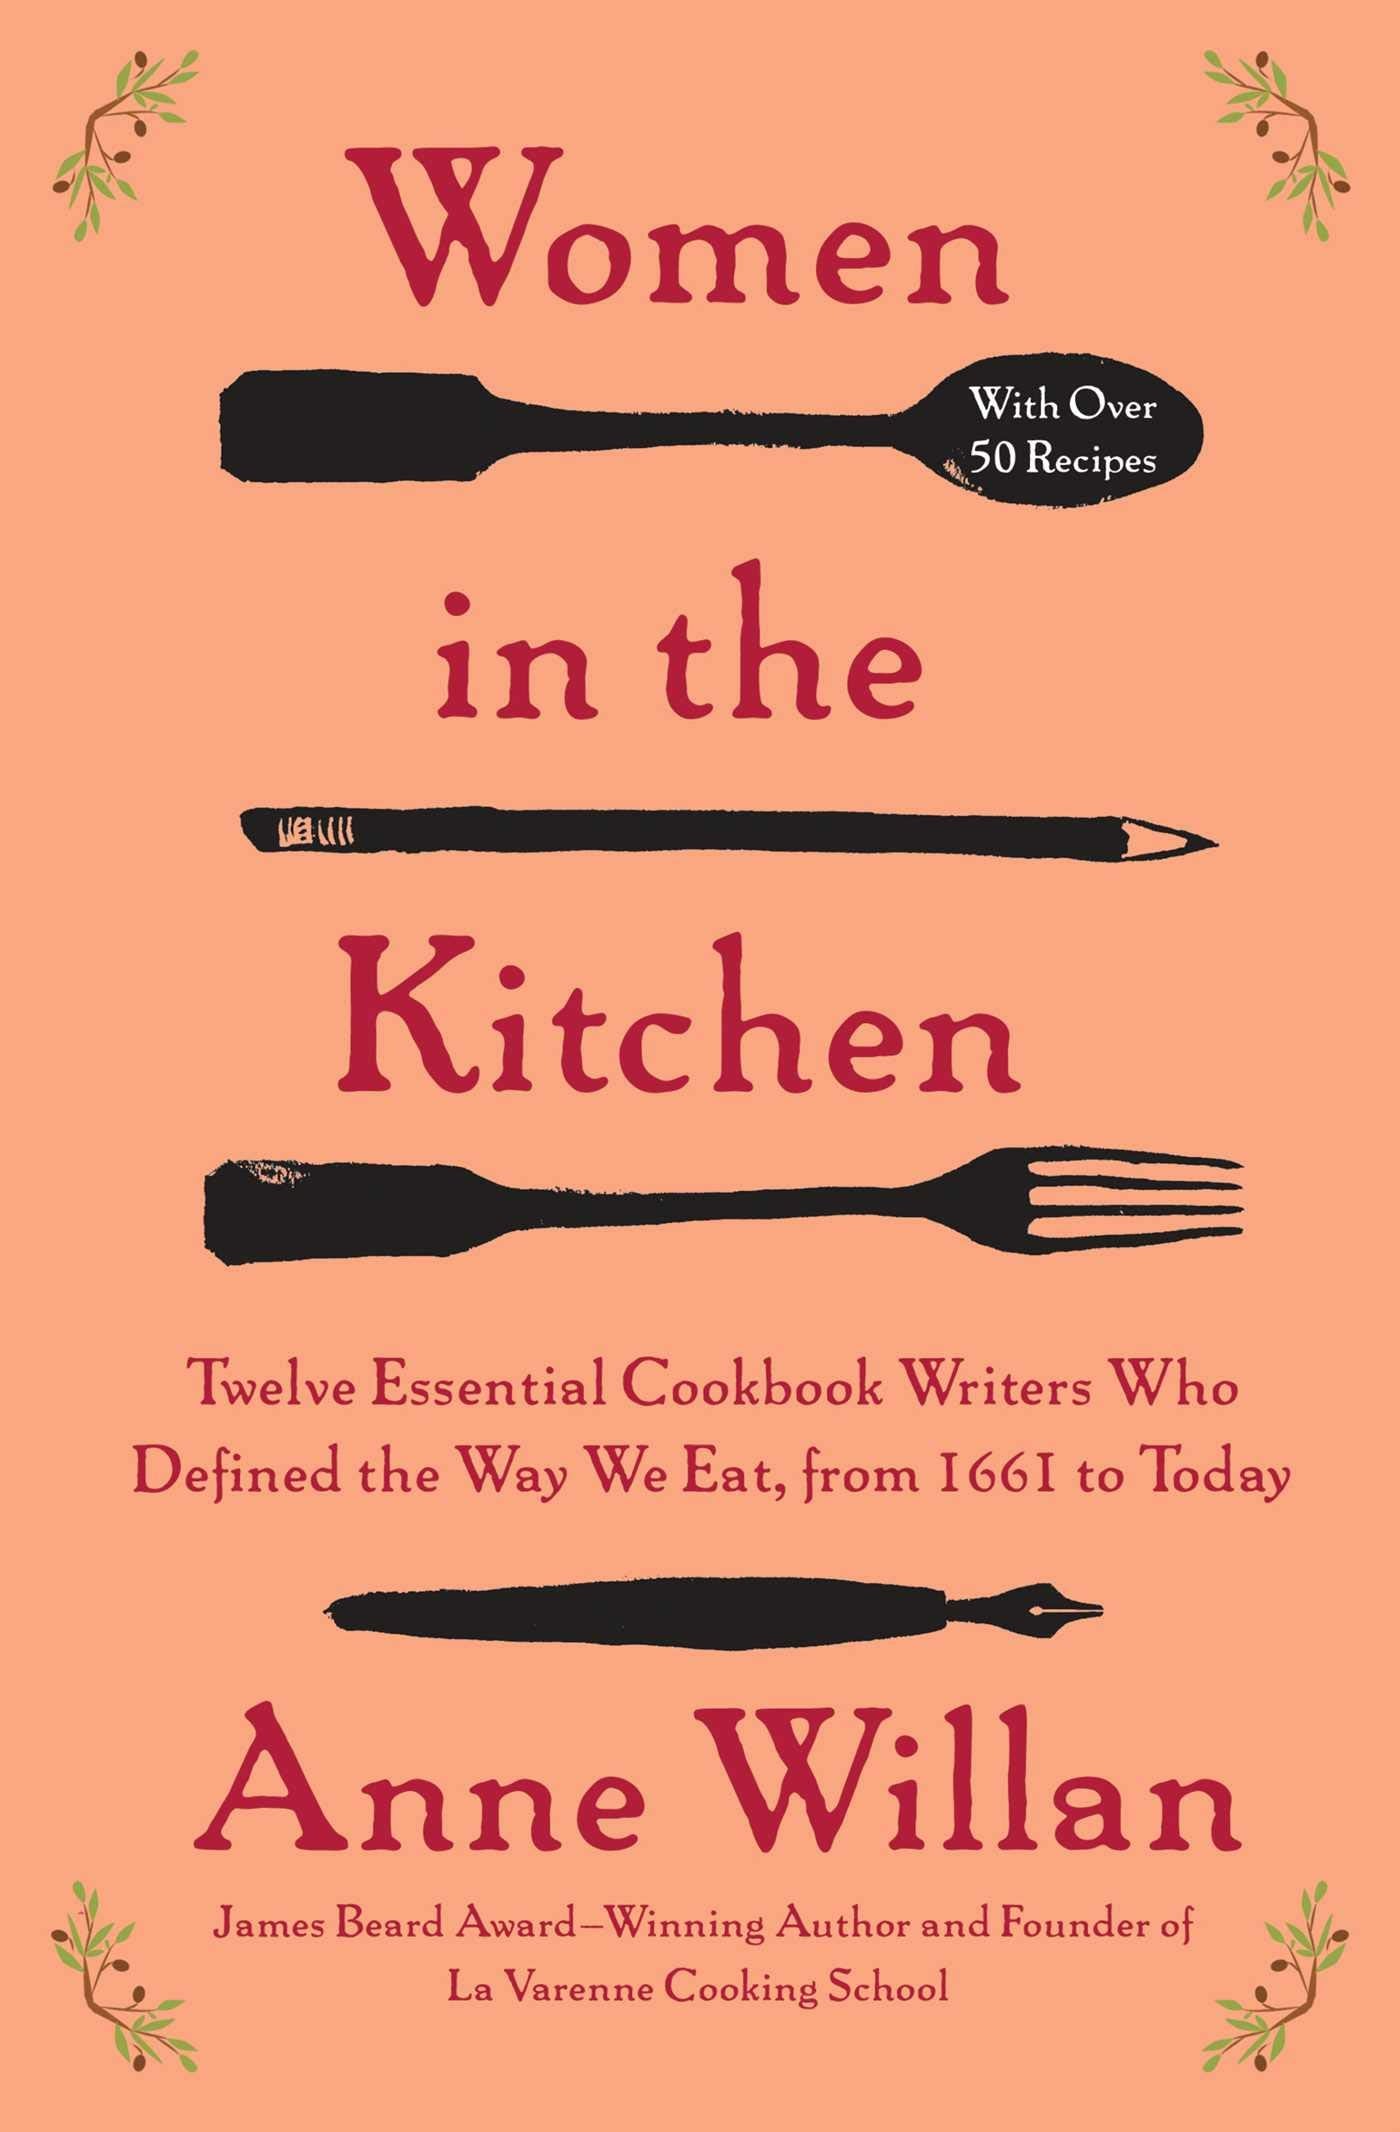 Women in the Kitchen: Twelve Essential Cookbook Writers Who Defined the Way We Eat, from 1661 to Today (Anne Willan)